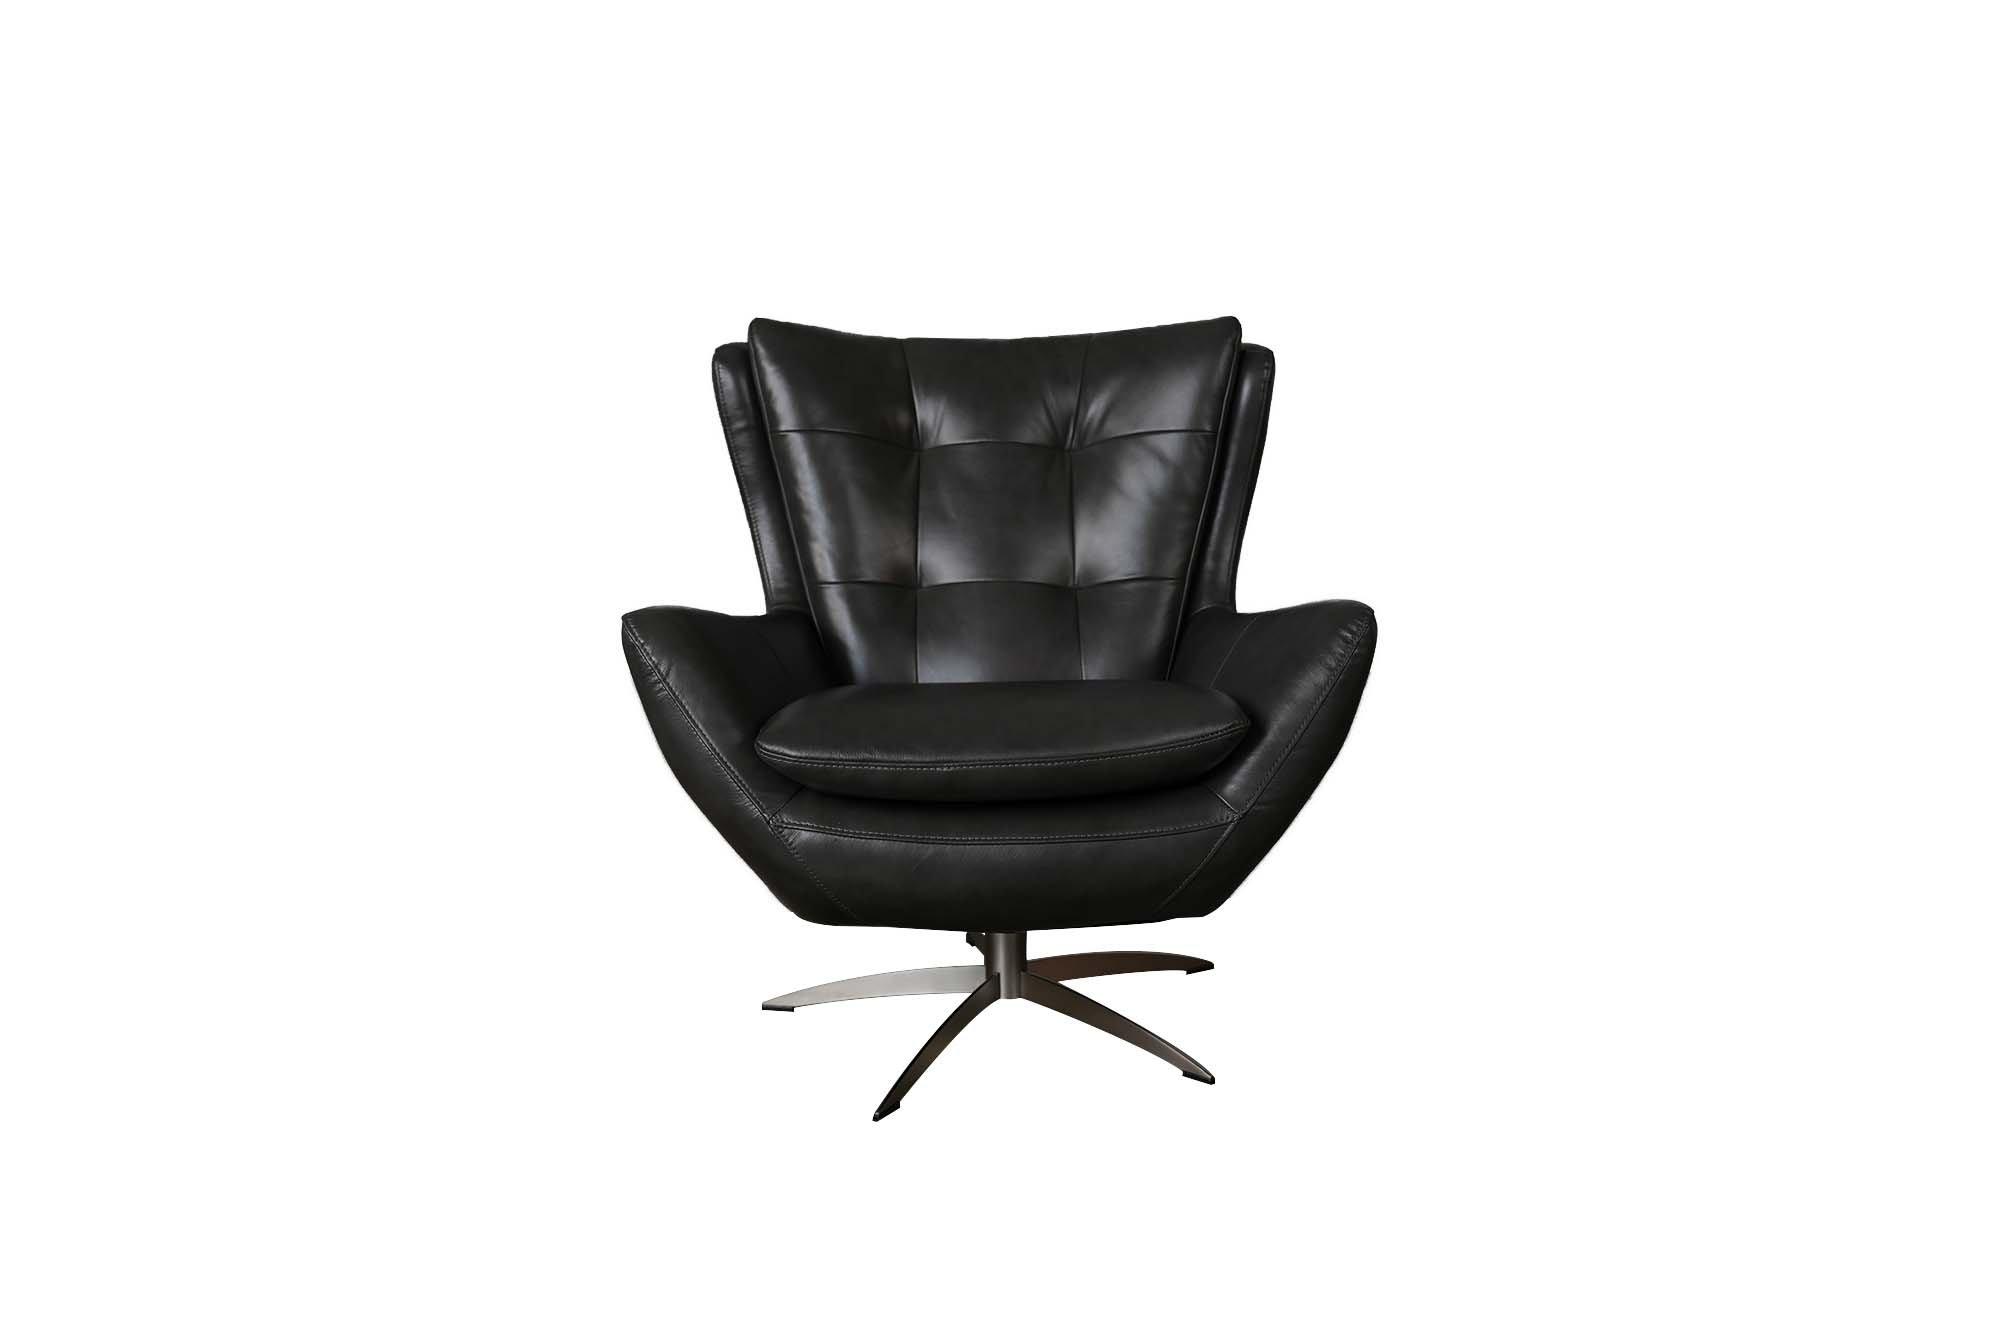 Contemporary, Modern Swivel Chair 596 McCann 59606B1855 in Charcoal Full Leather